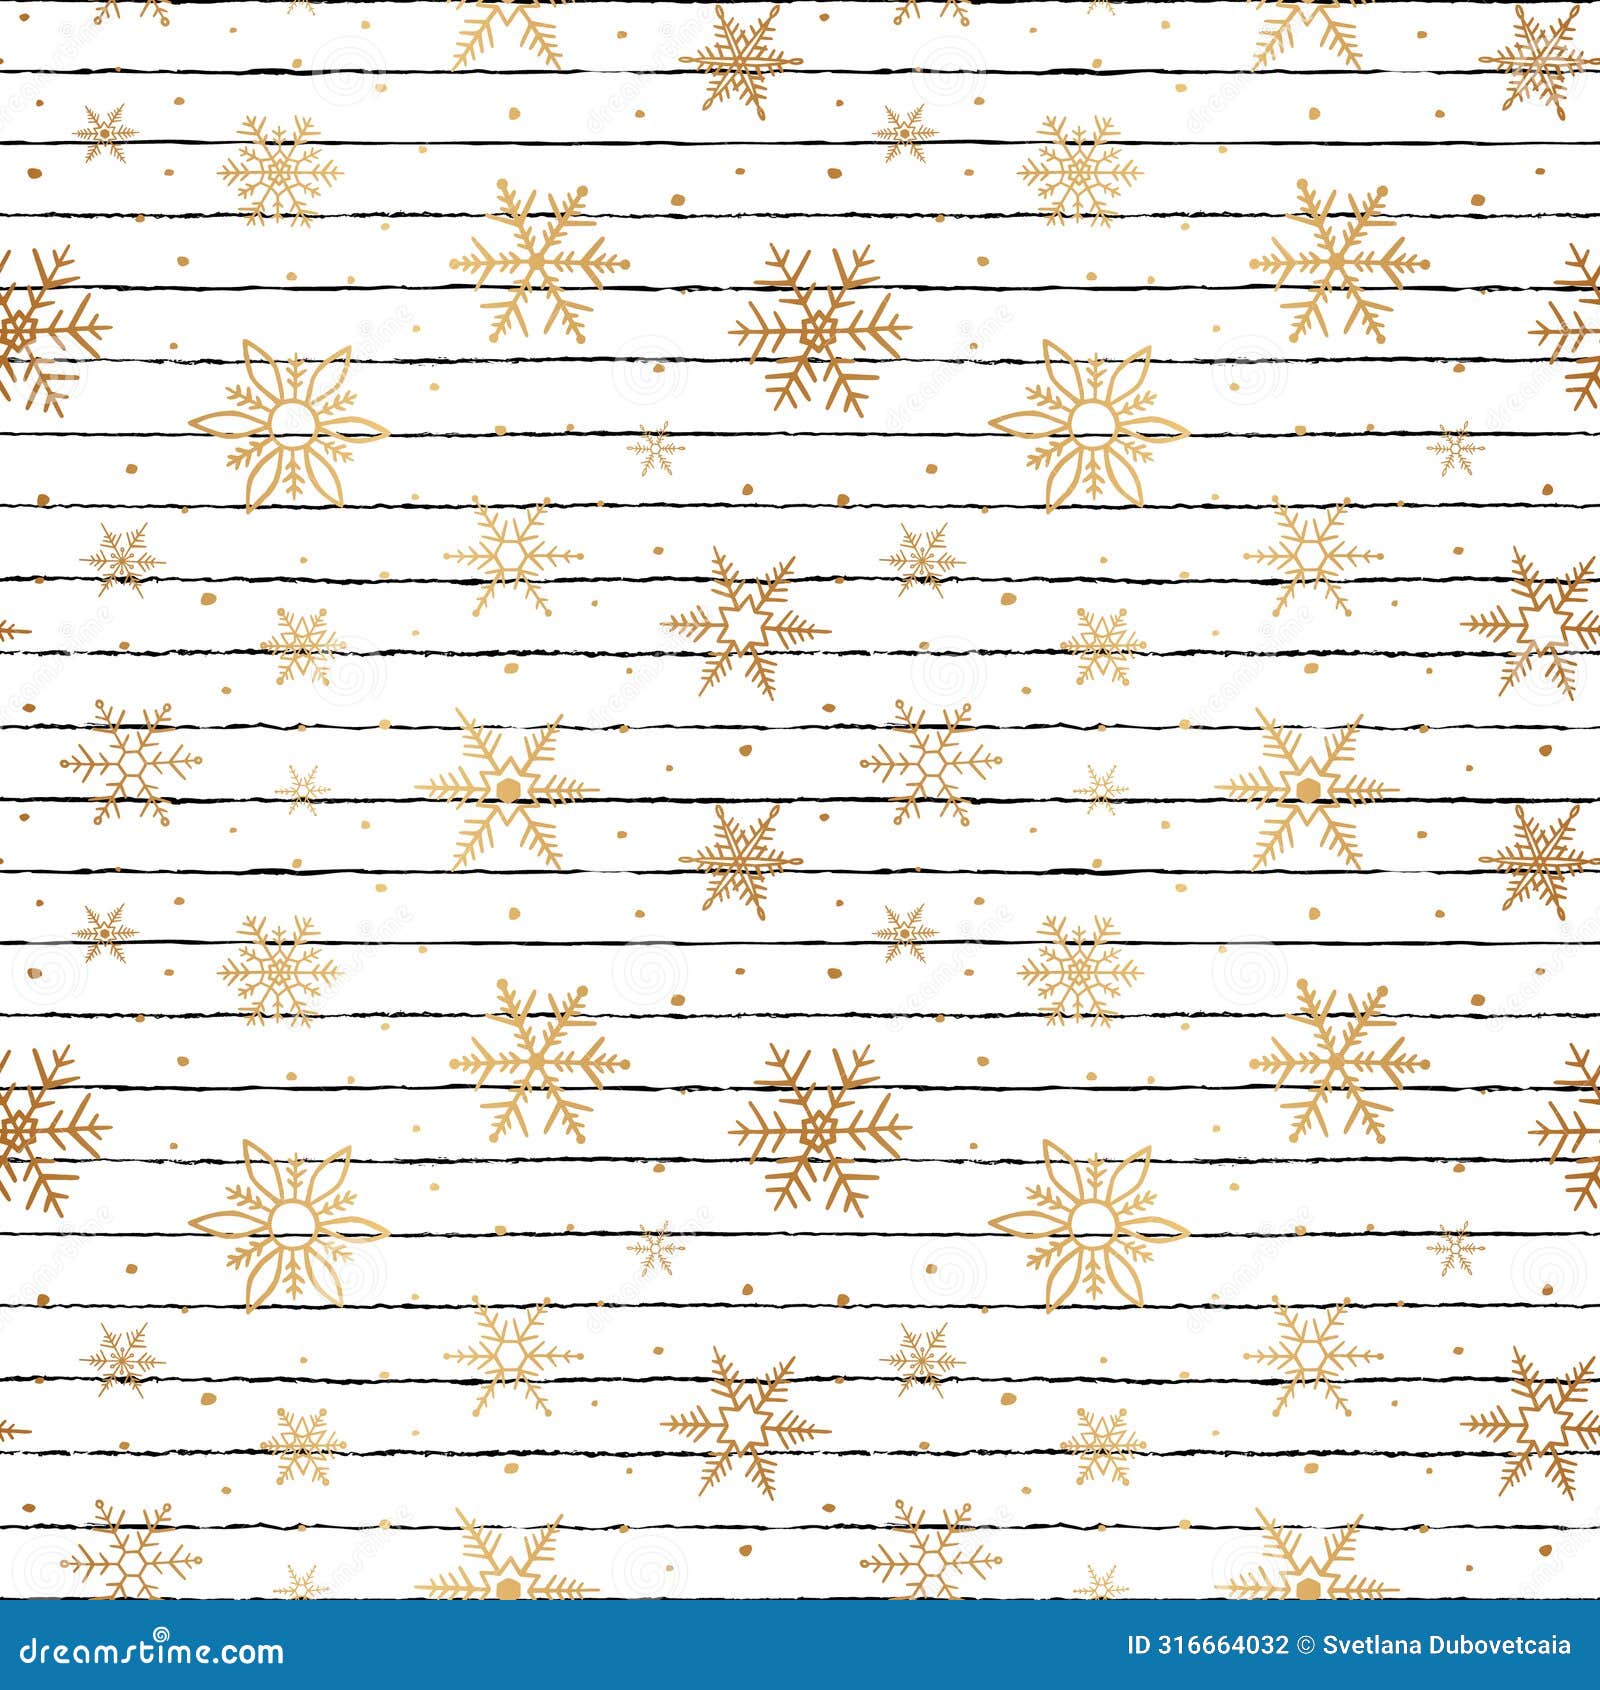 snowflake seamless pattern. repeated gold snowflakes on white background  winter prints. repeating foil. cute snowflakes